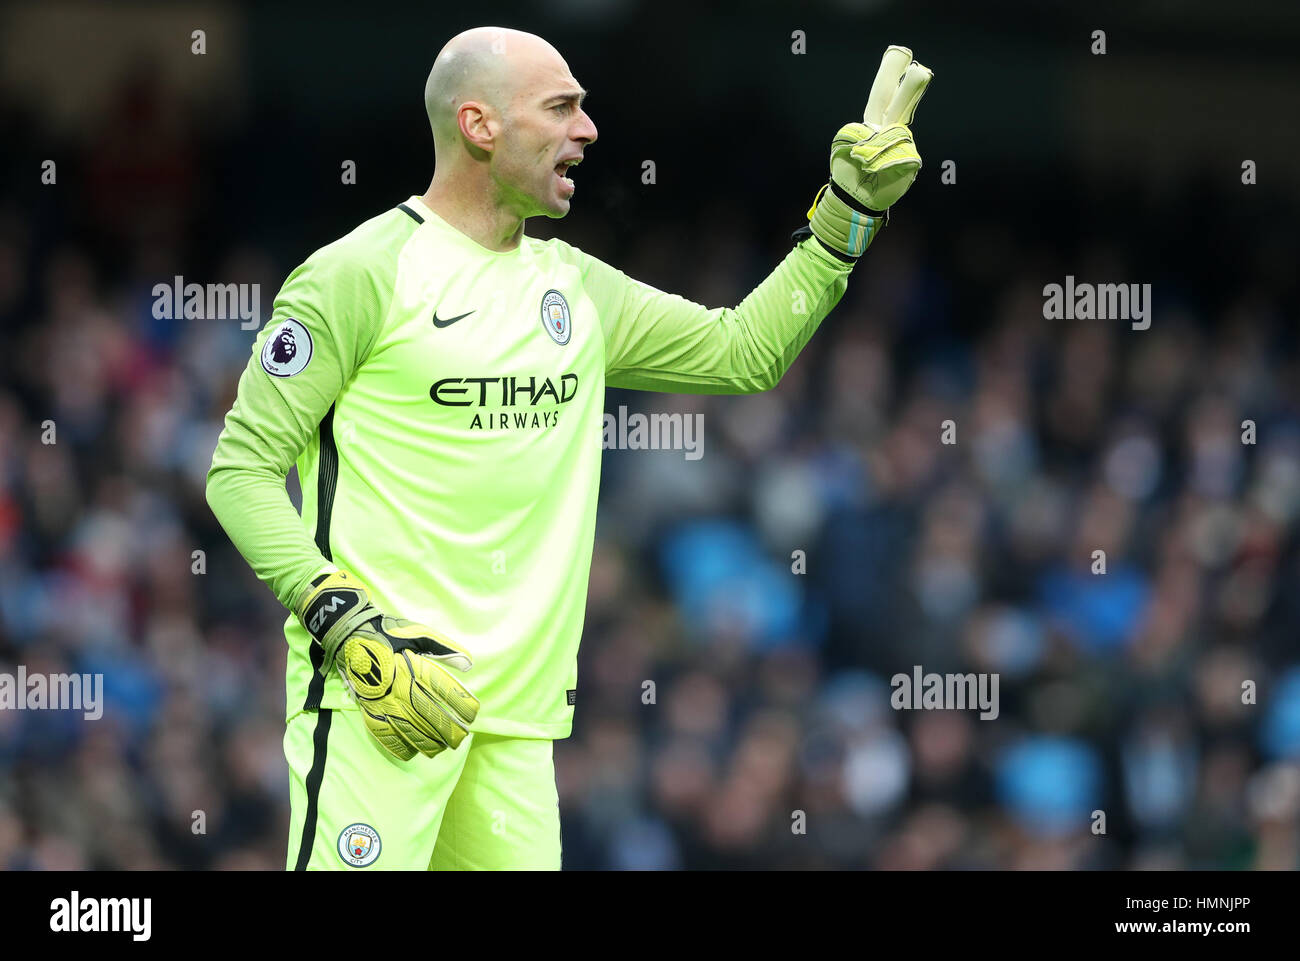 Manchester City goalkeeper Willy Caballero during the Premier League match at the Etihad Stadium, Manchester. Stock Photo